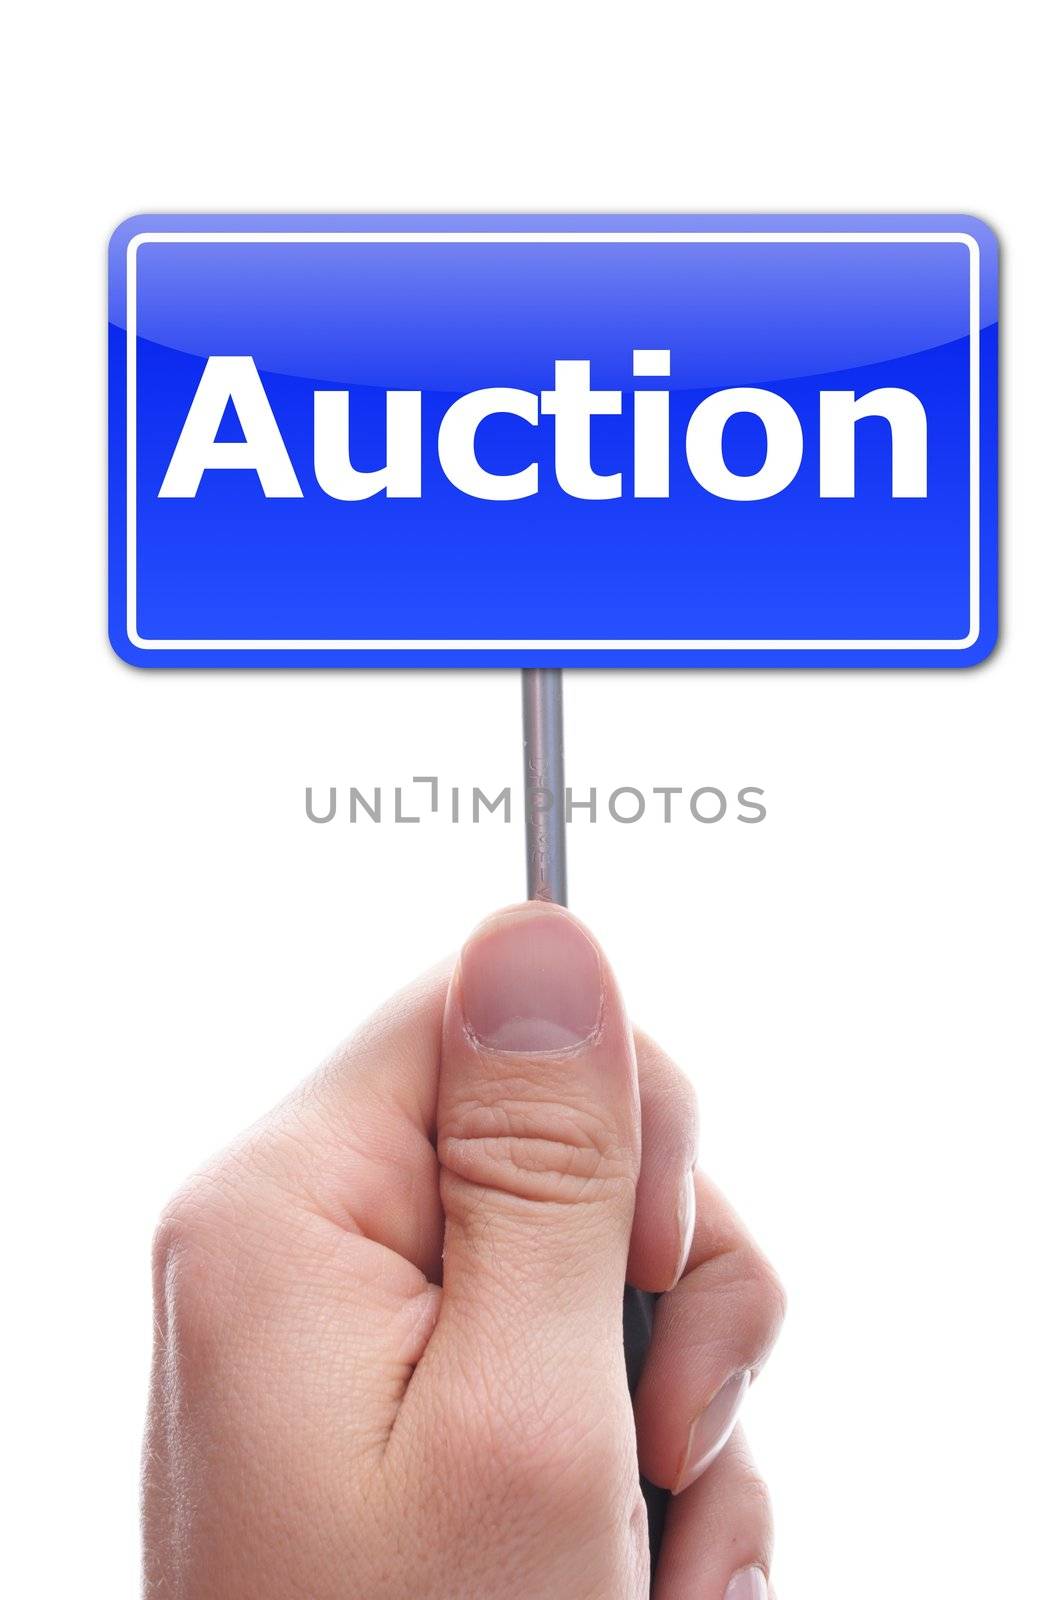 buy or sell on auction concept with hand holding paper